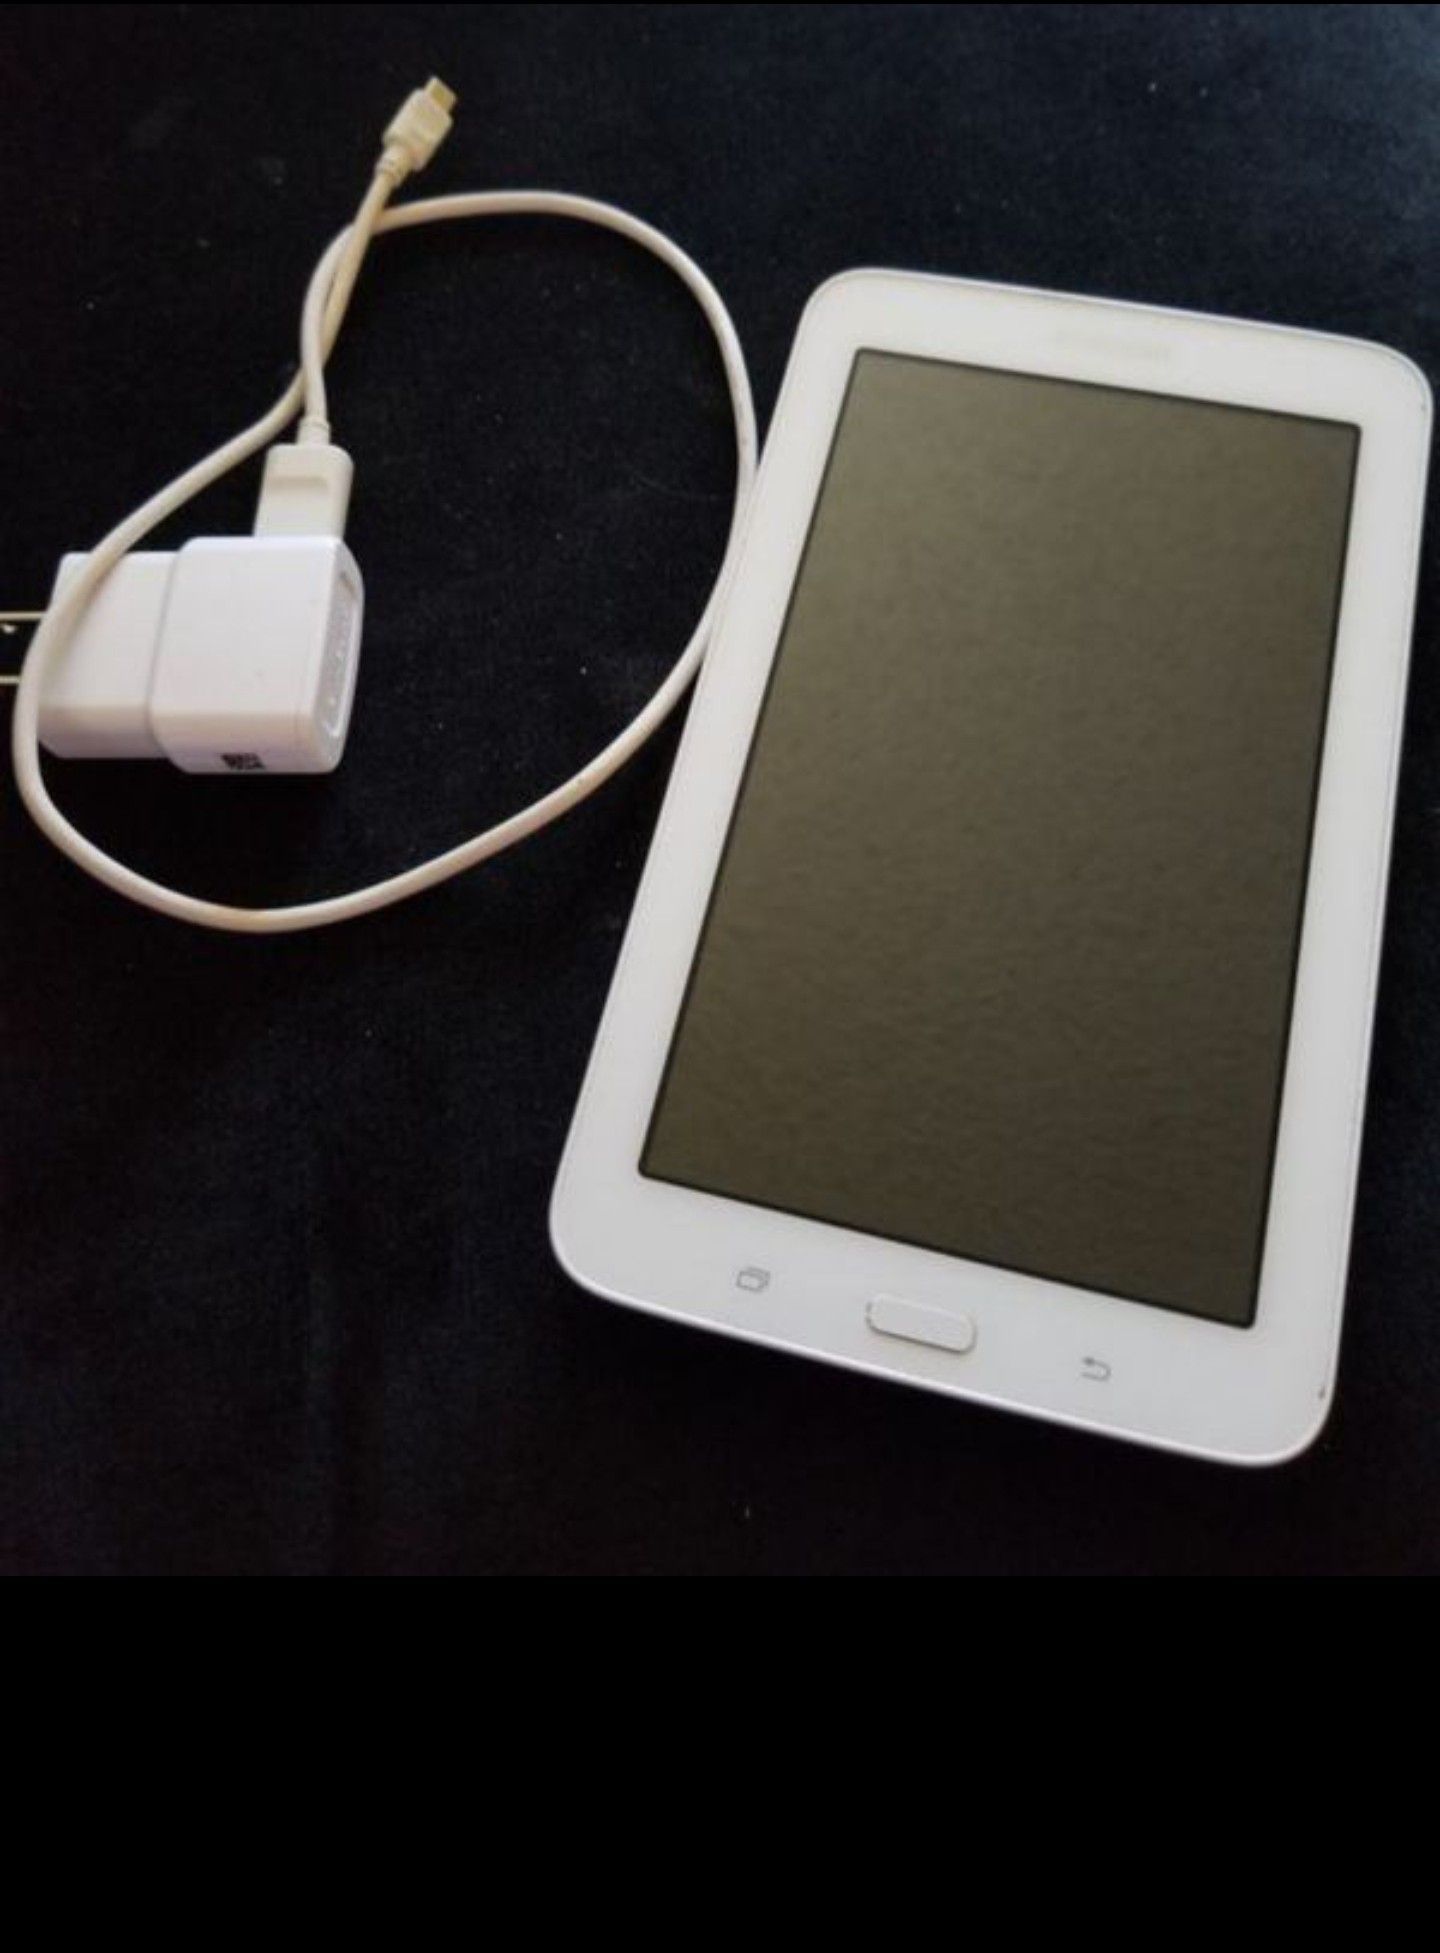 Samsung Galaxy Tab E Lite Wi-Fi 8 GB White 7" Got Wet does not turn on Fix it or for parts